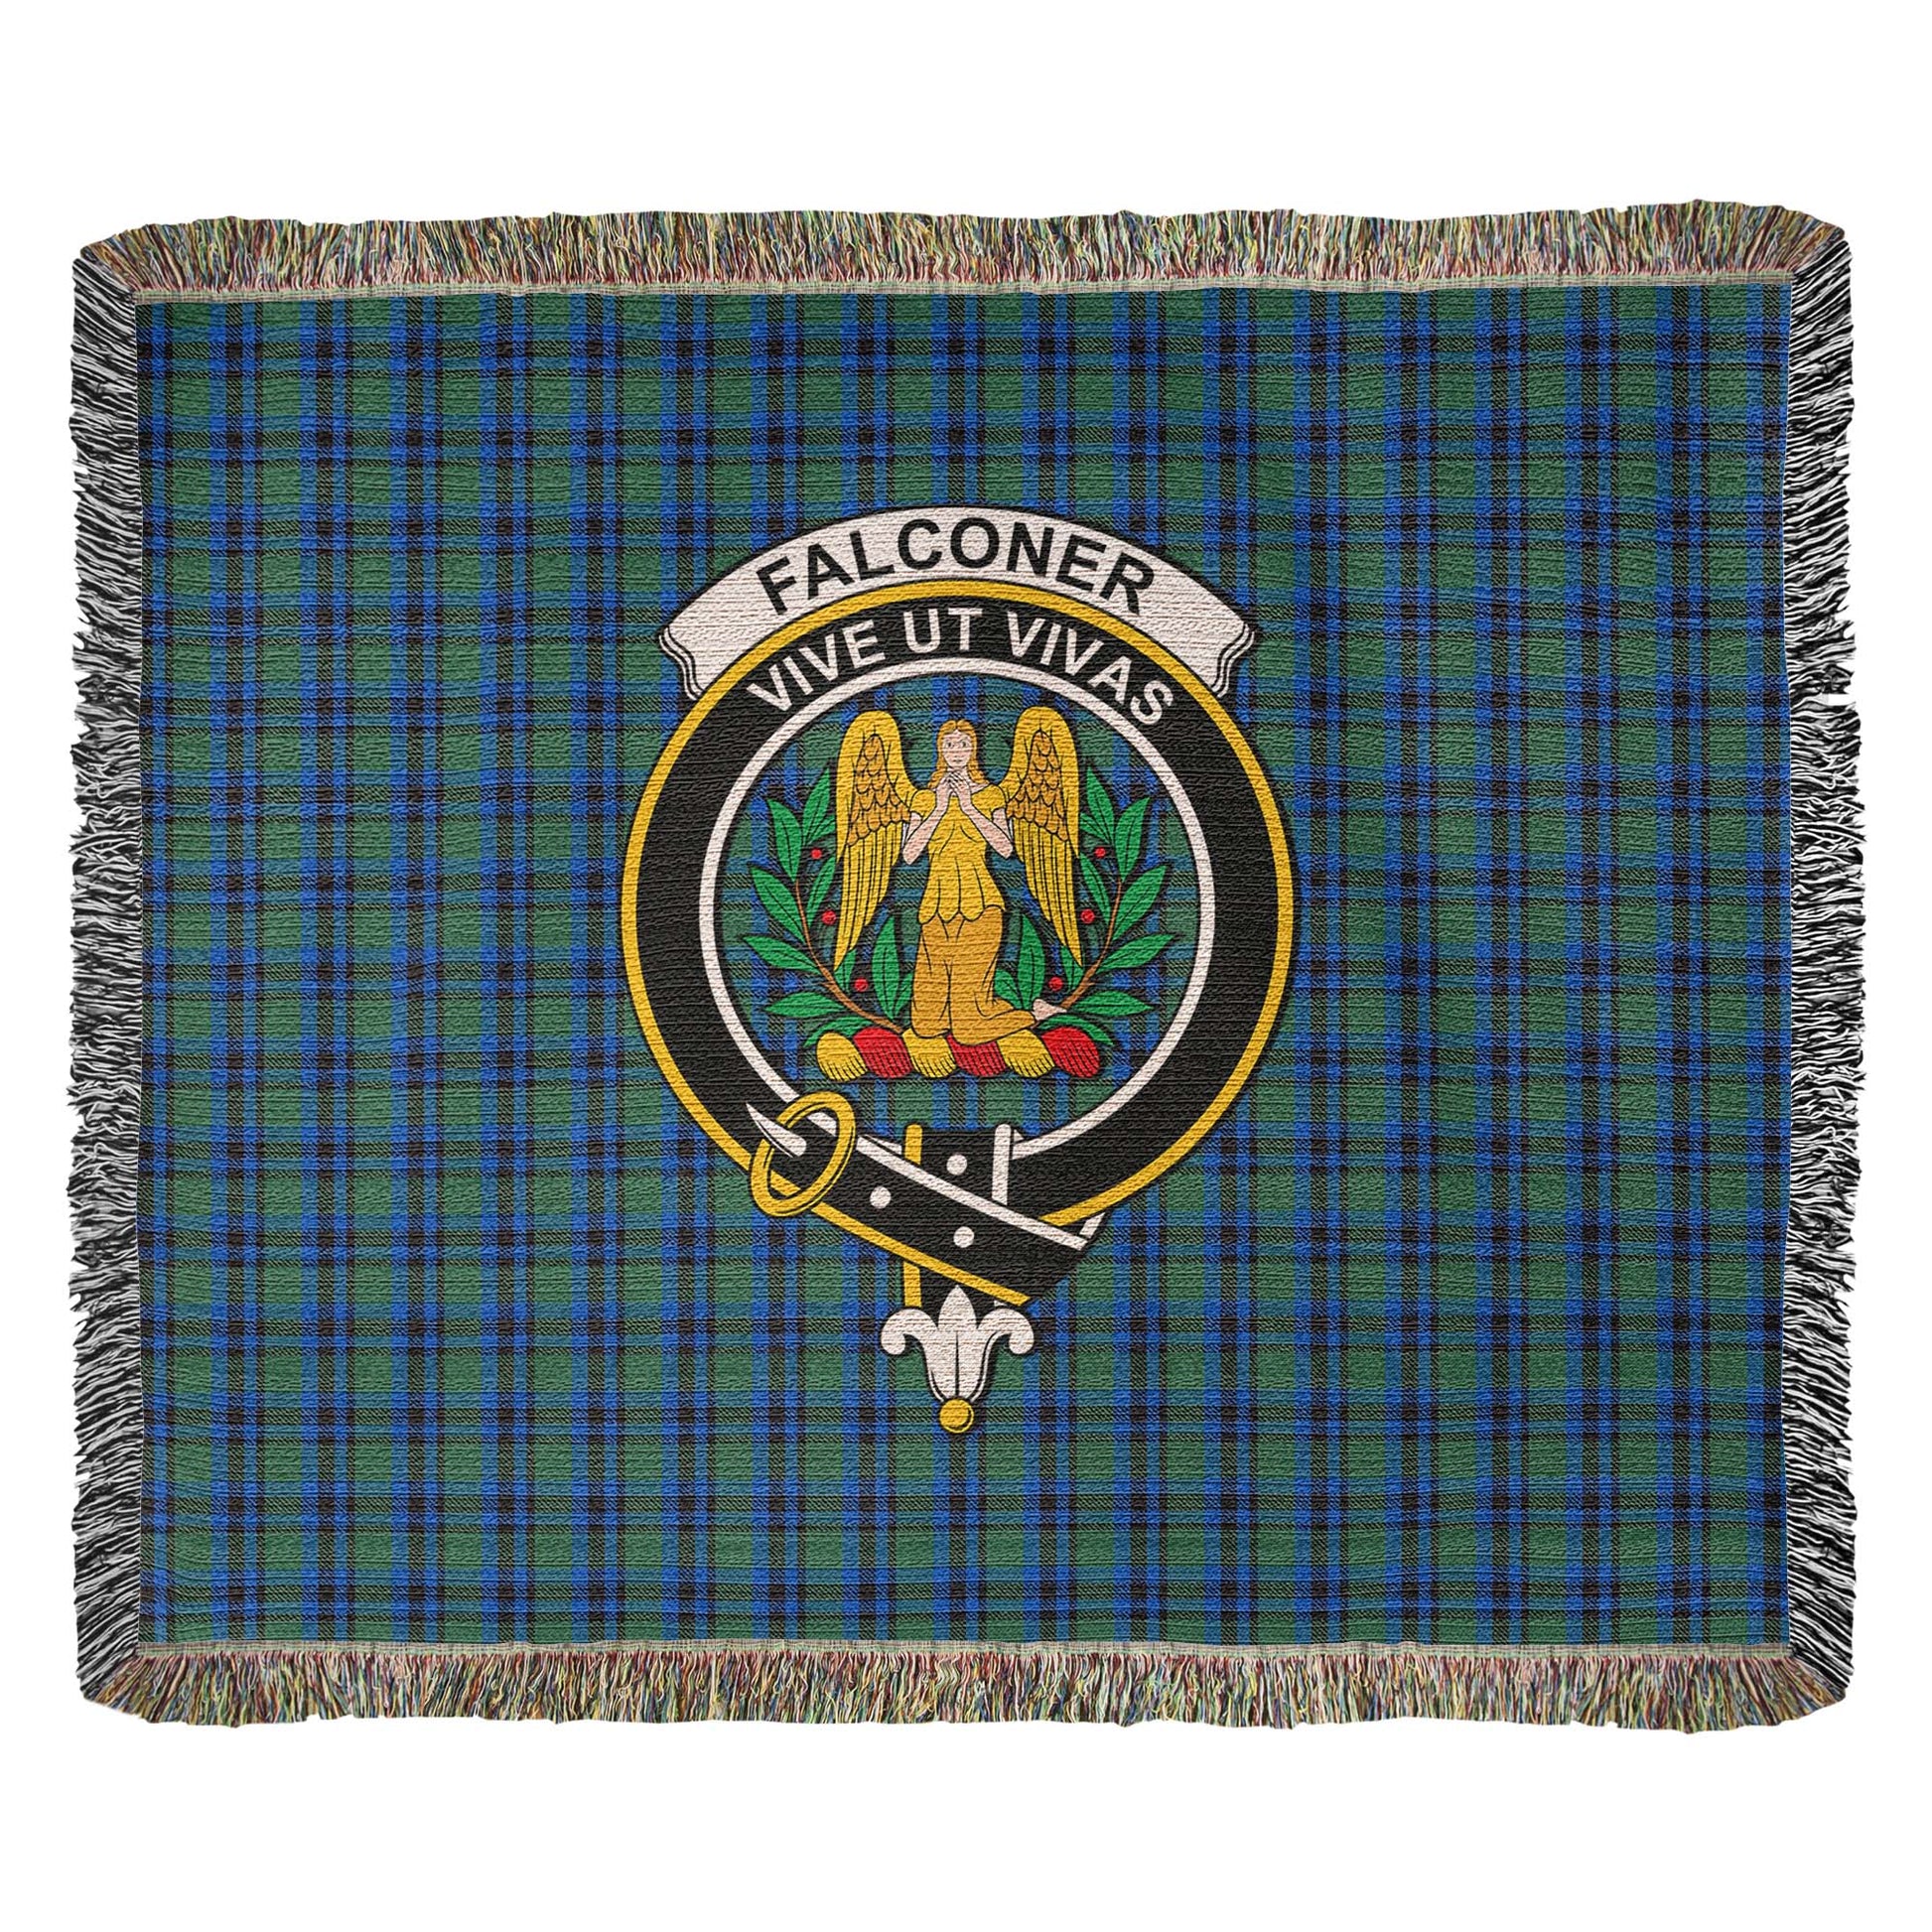 Tartan Vibes Clothing Falconer Tartan Woven Blanket with Family Crest